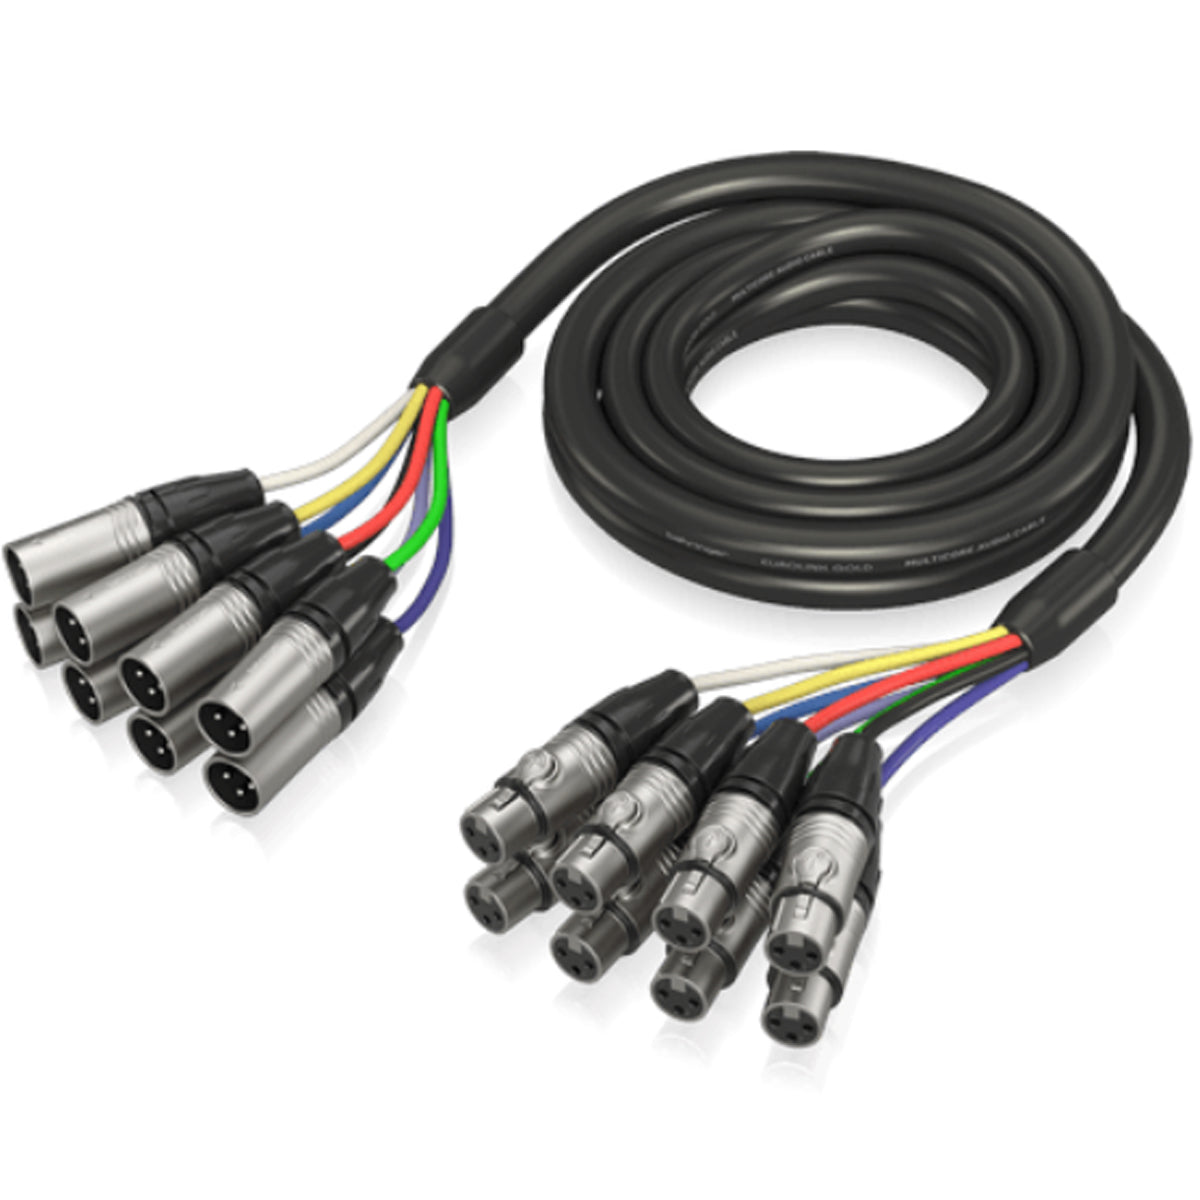 Behringer GMX300 3m 8-Way Multicore Cable Snake w/ XLR Connectors